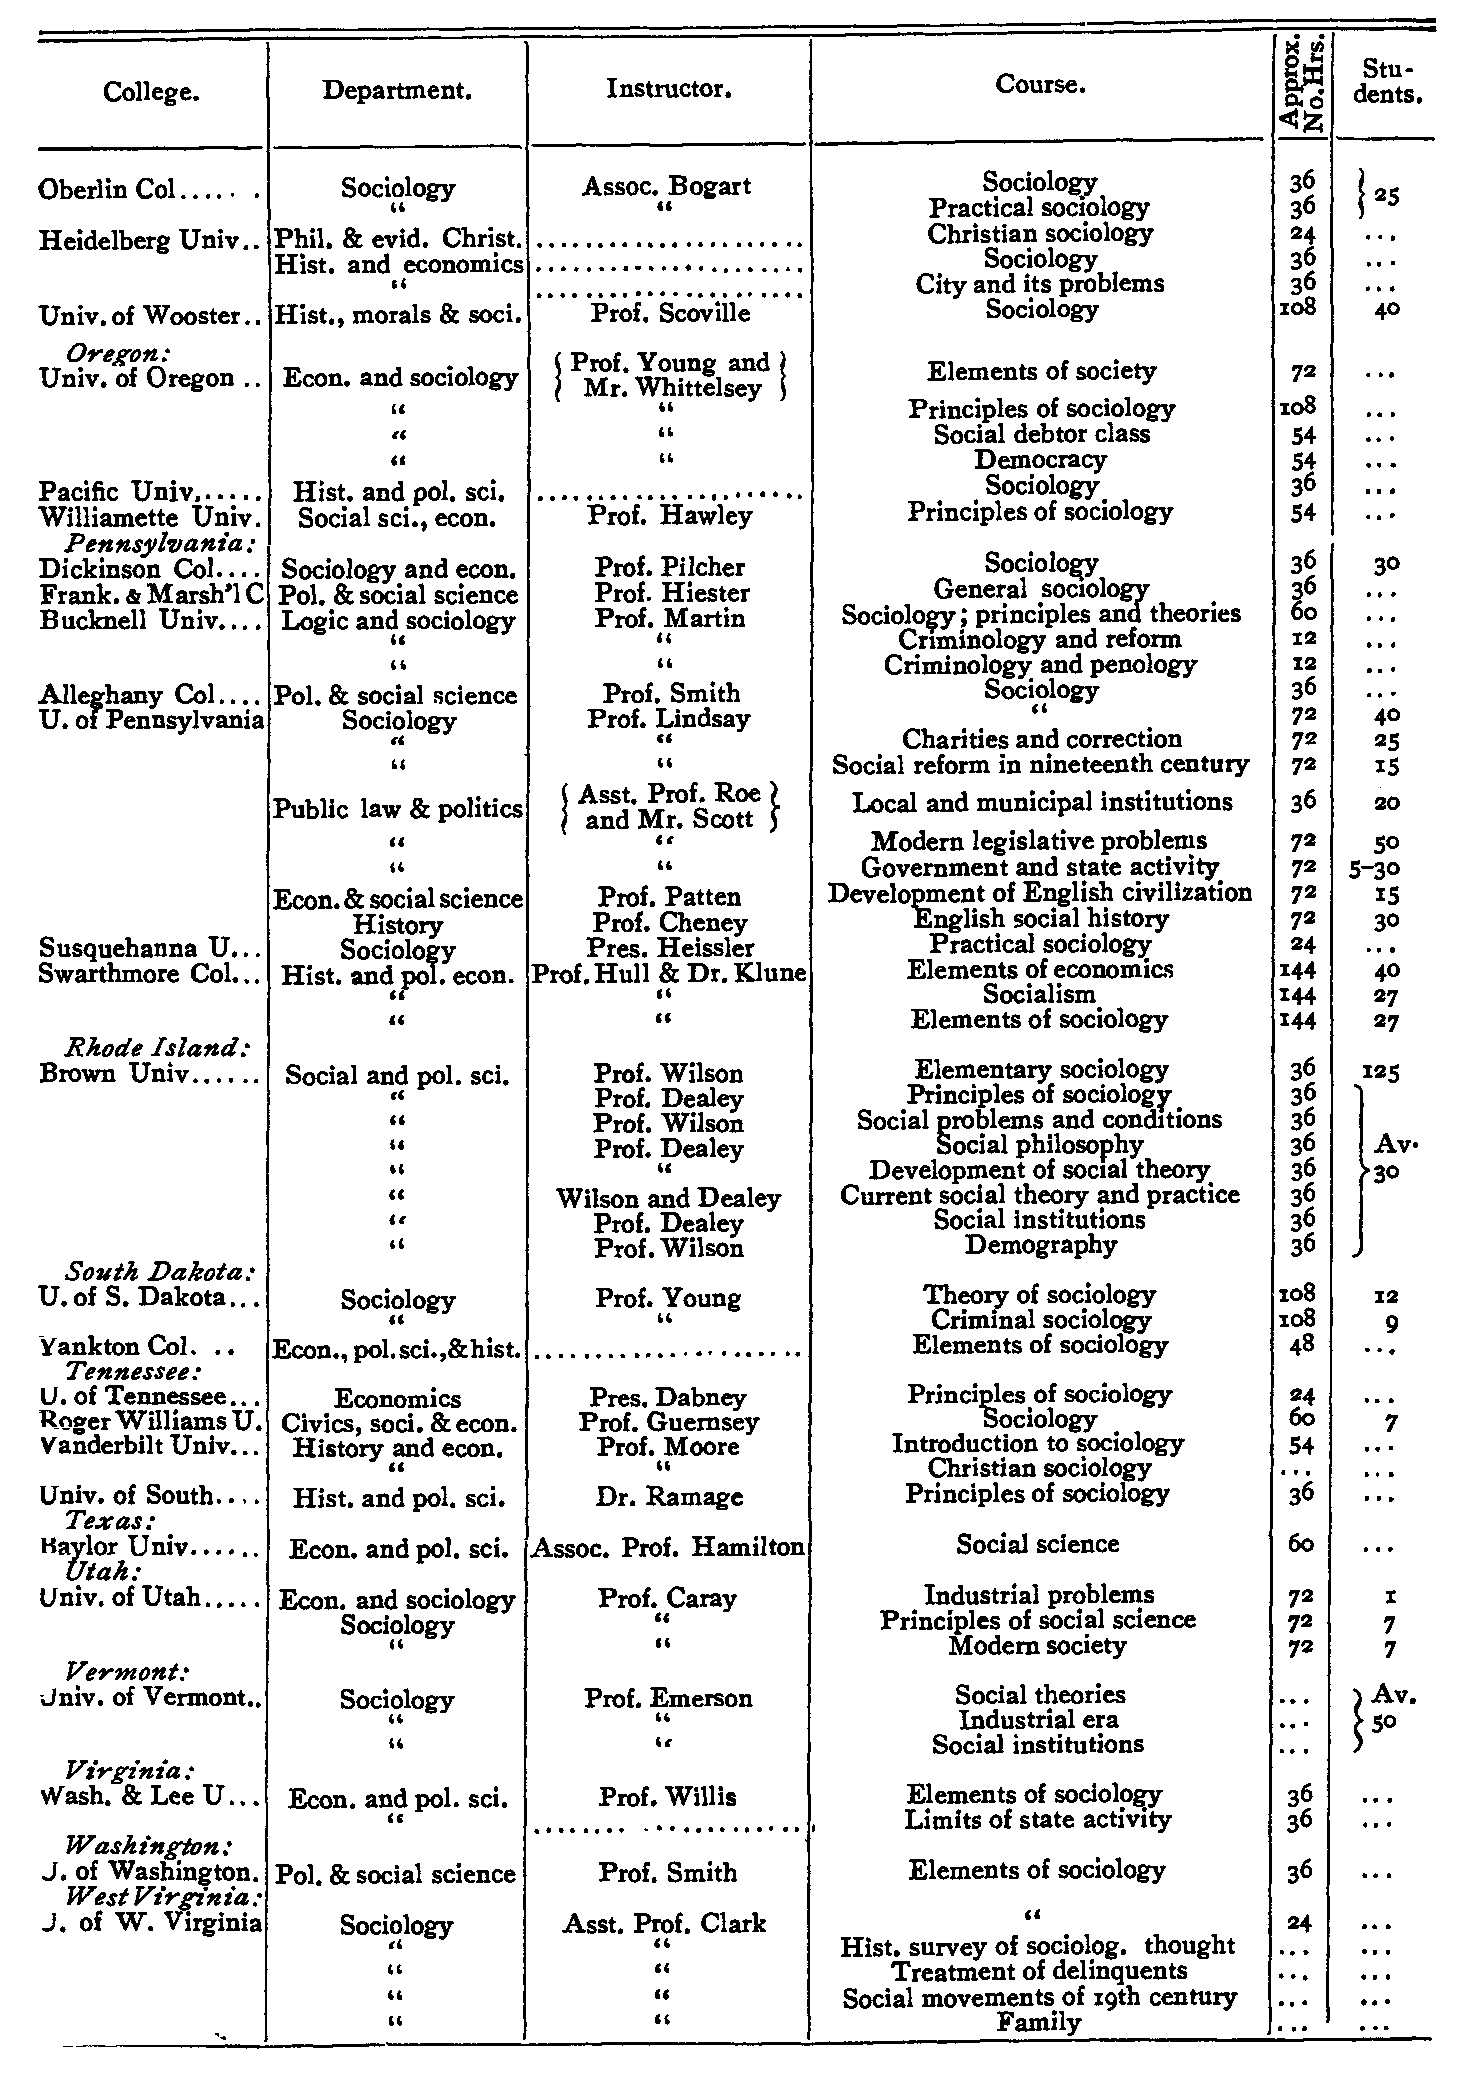 Schedule of Courses in Sociology in 1907, part 6